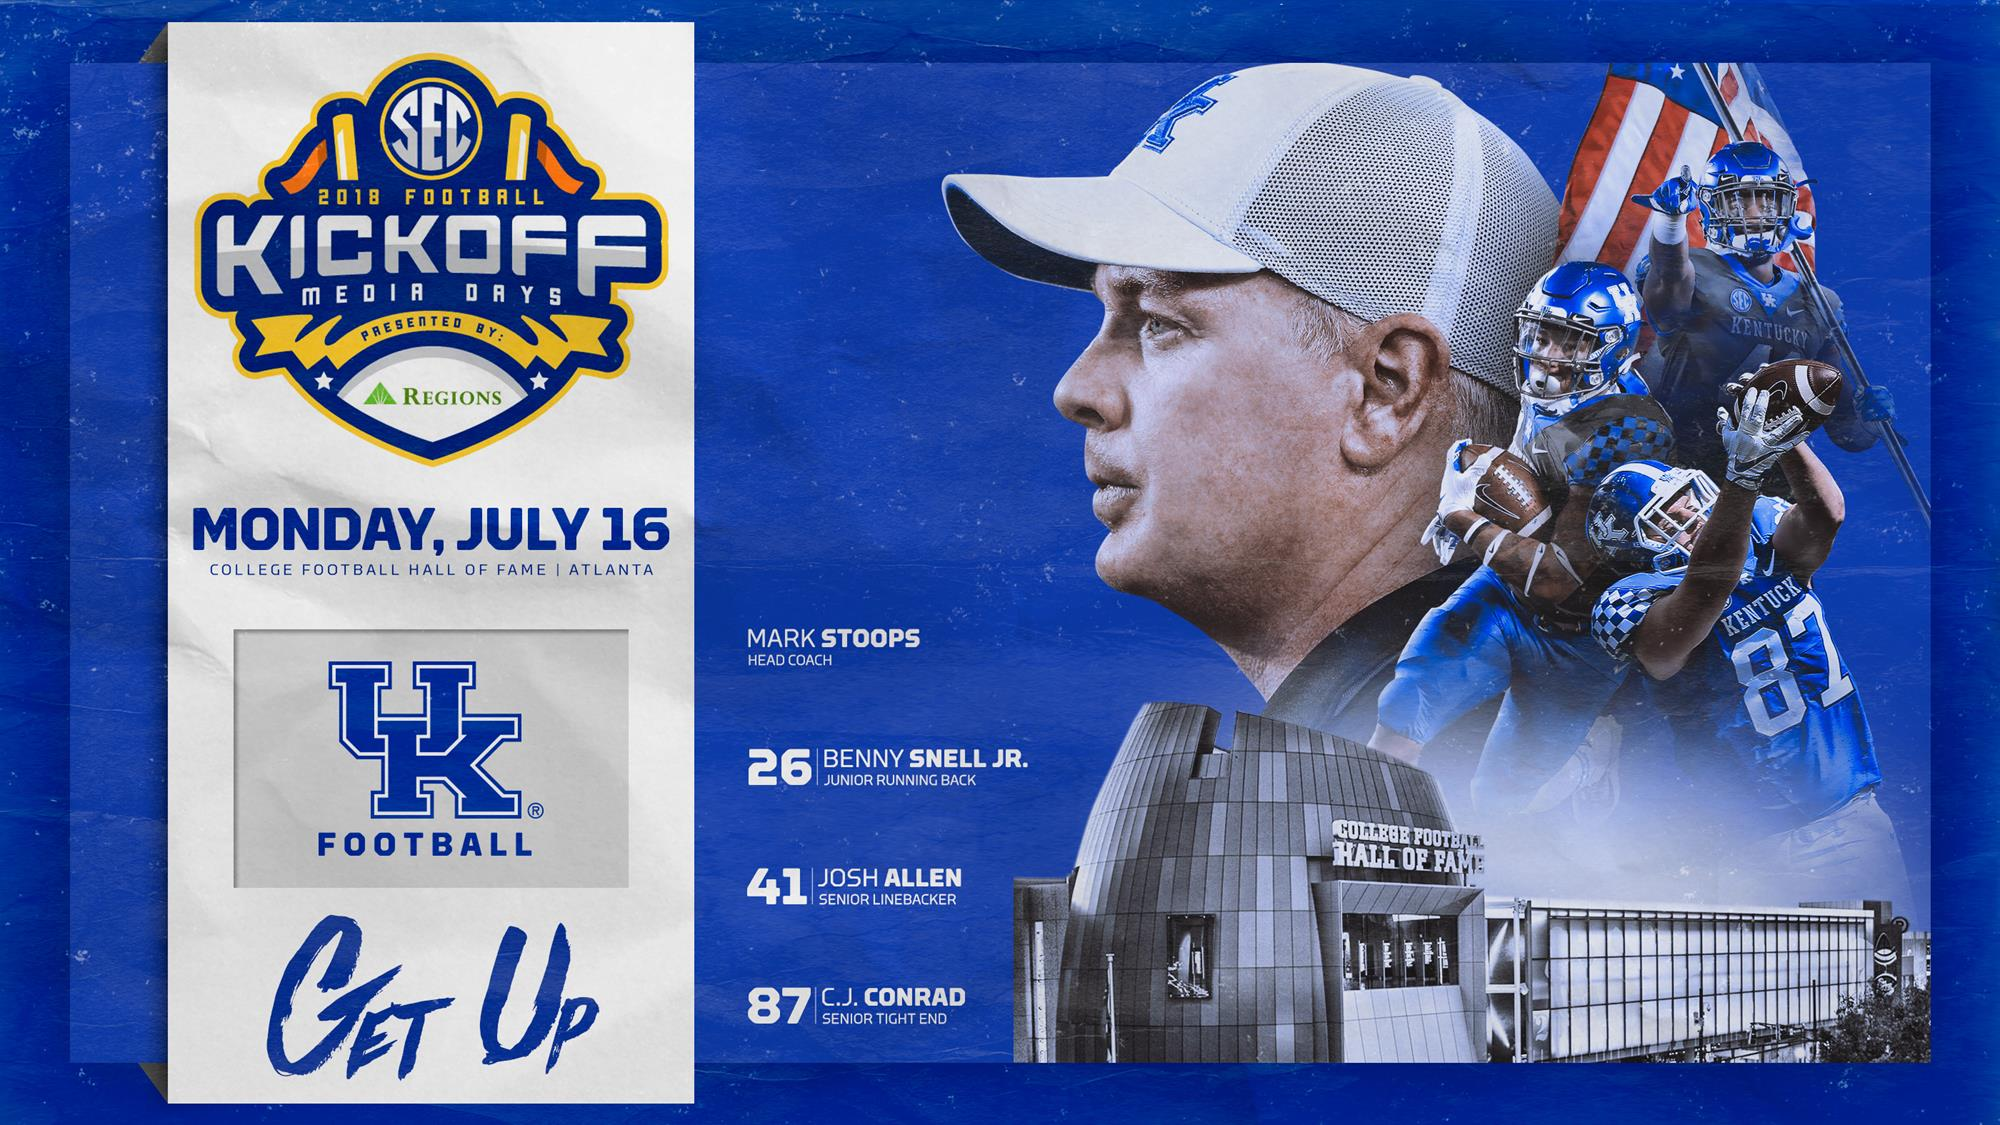 Kentucky to be Featured at SEC Media Days Monday